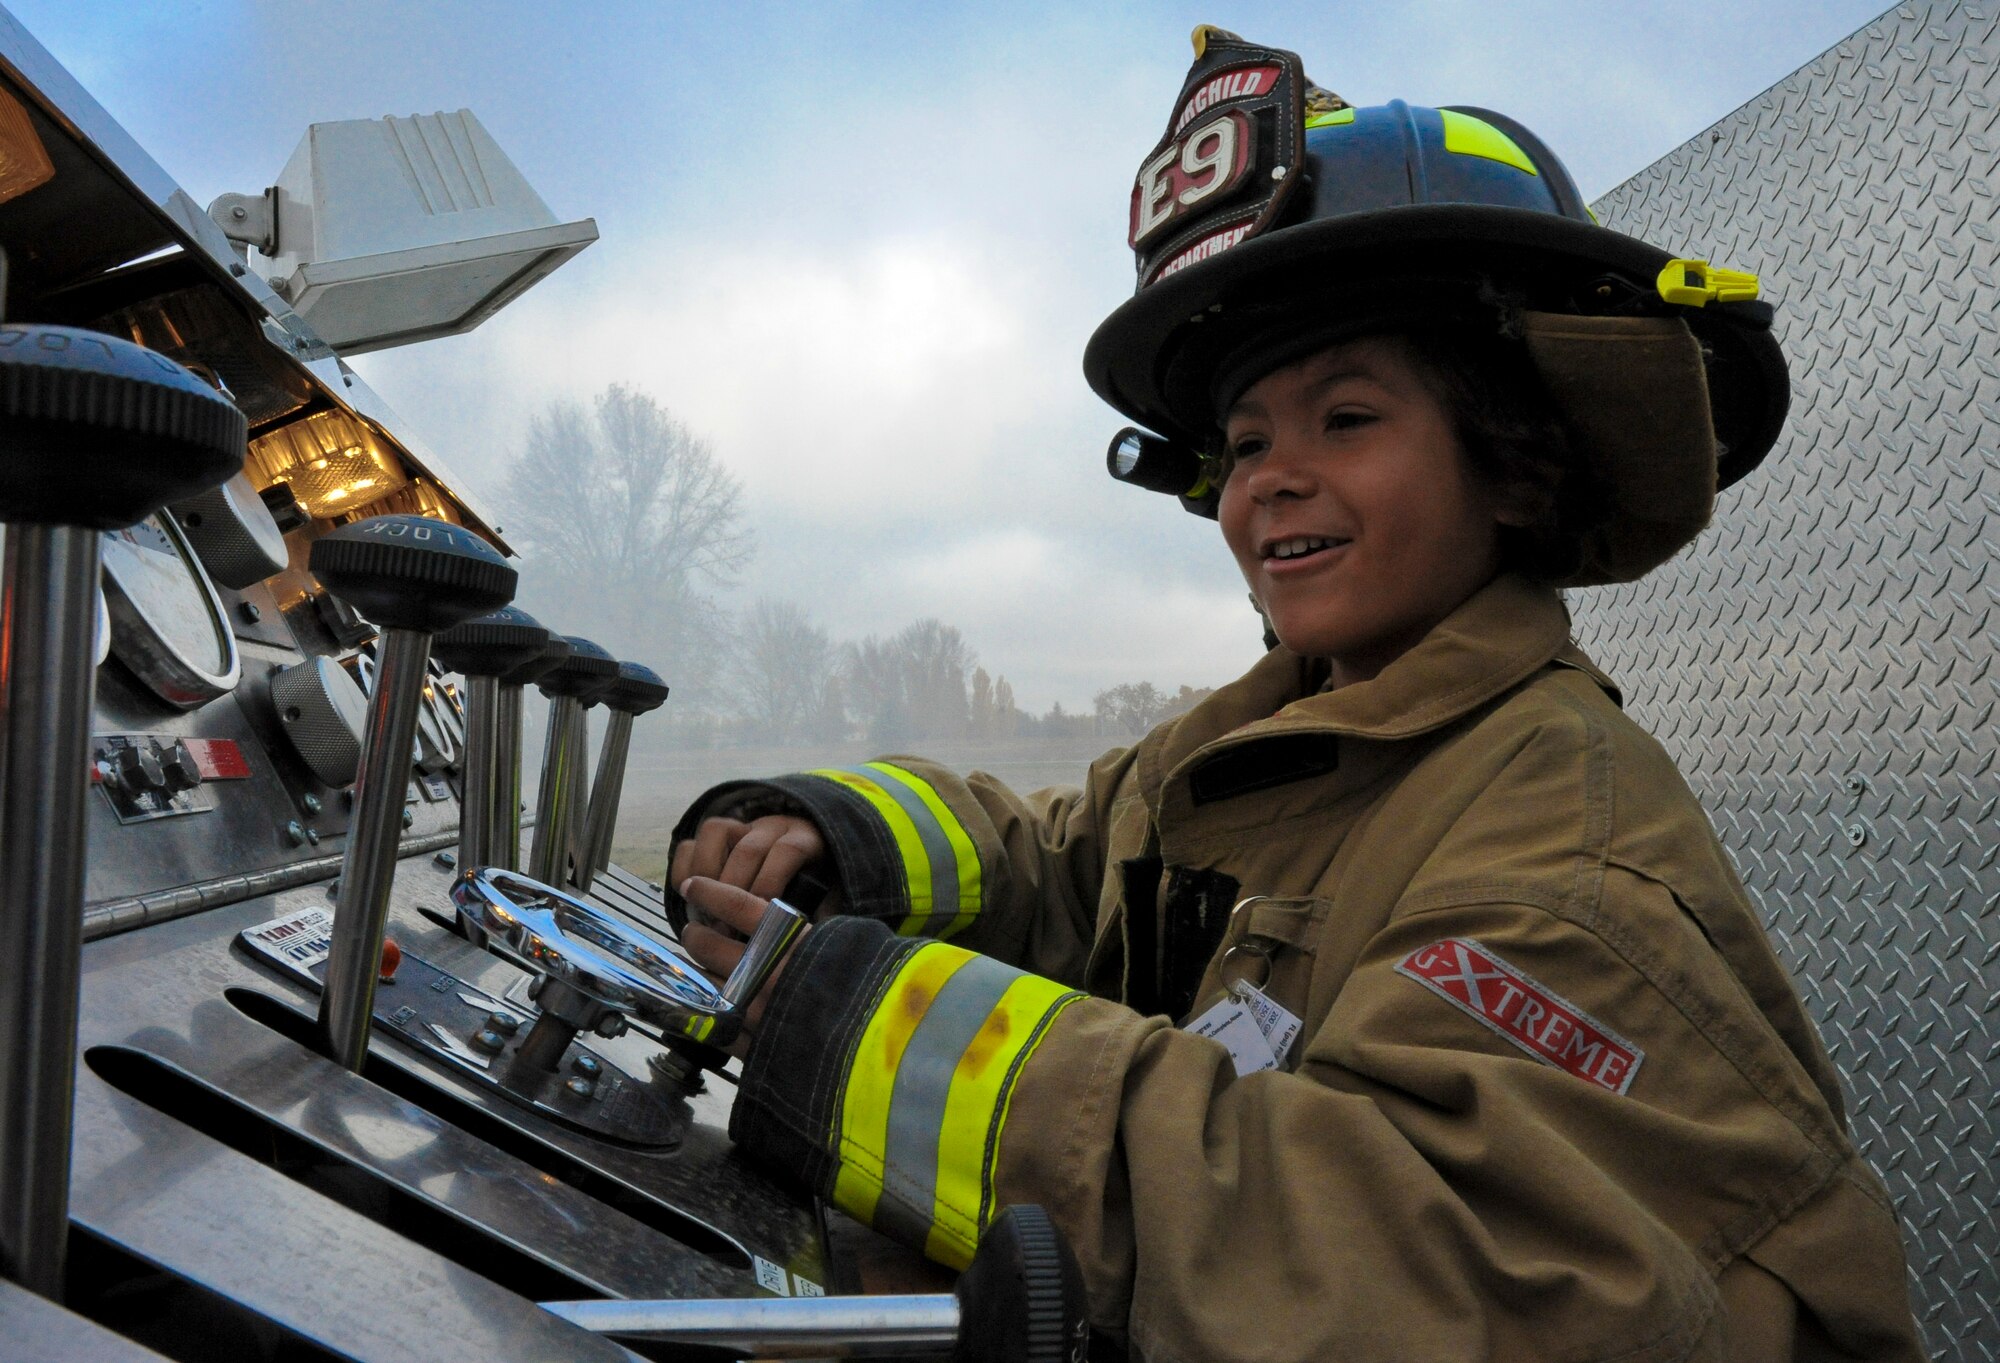 Trevion Worthy mans the controls of a fire truck during his time at the fire department along his journey as ‘Airman for a Day’ at Fairchild Air Force Base, Wash., Nov. 2, 2012. Tre was the second youth to participate in the program at Fairchild that gives children a break from challenges they face on a day-to-day basis. Tre has been fighting Acute Lymphoblastic Leukemia and undergone almost two years of chemo therapy. (U.S. Air Force photo by Senior Airman Benjamin Stratton)